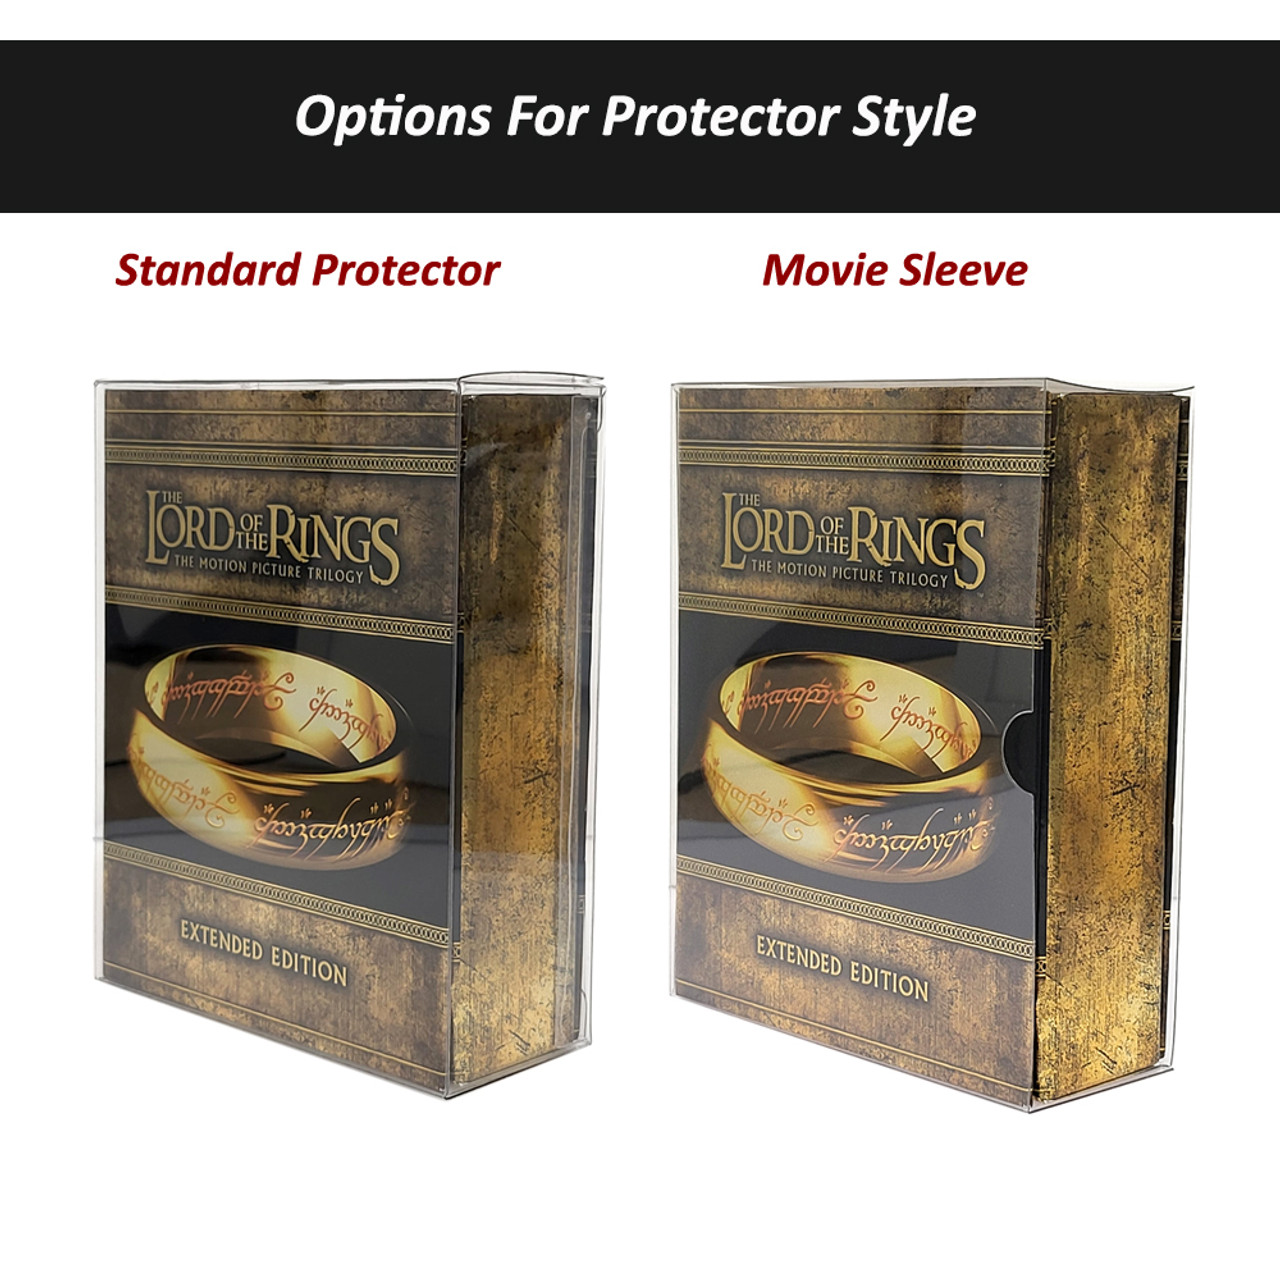 Protector For Christina Lindberg Thrille: A Cruel Picture 4K Deluxe Limited Edition